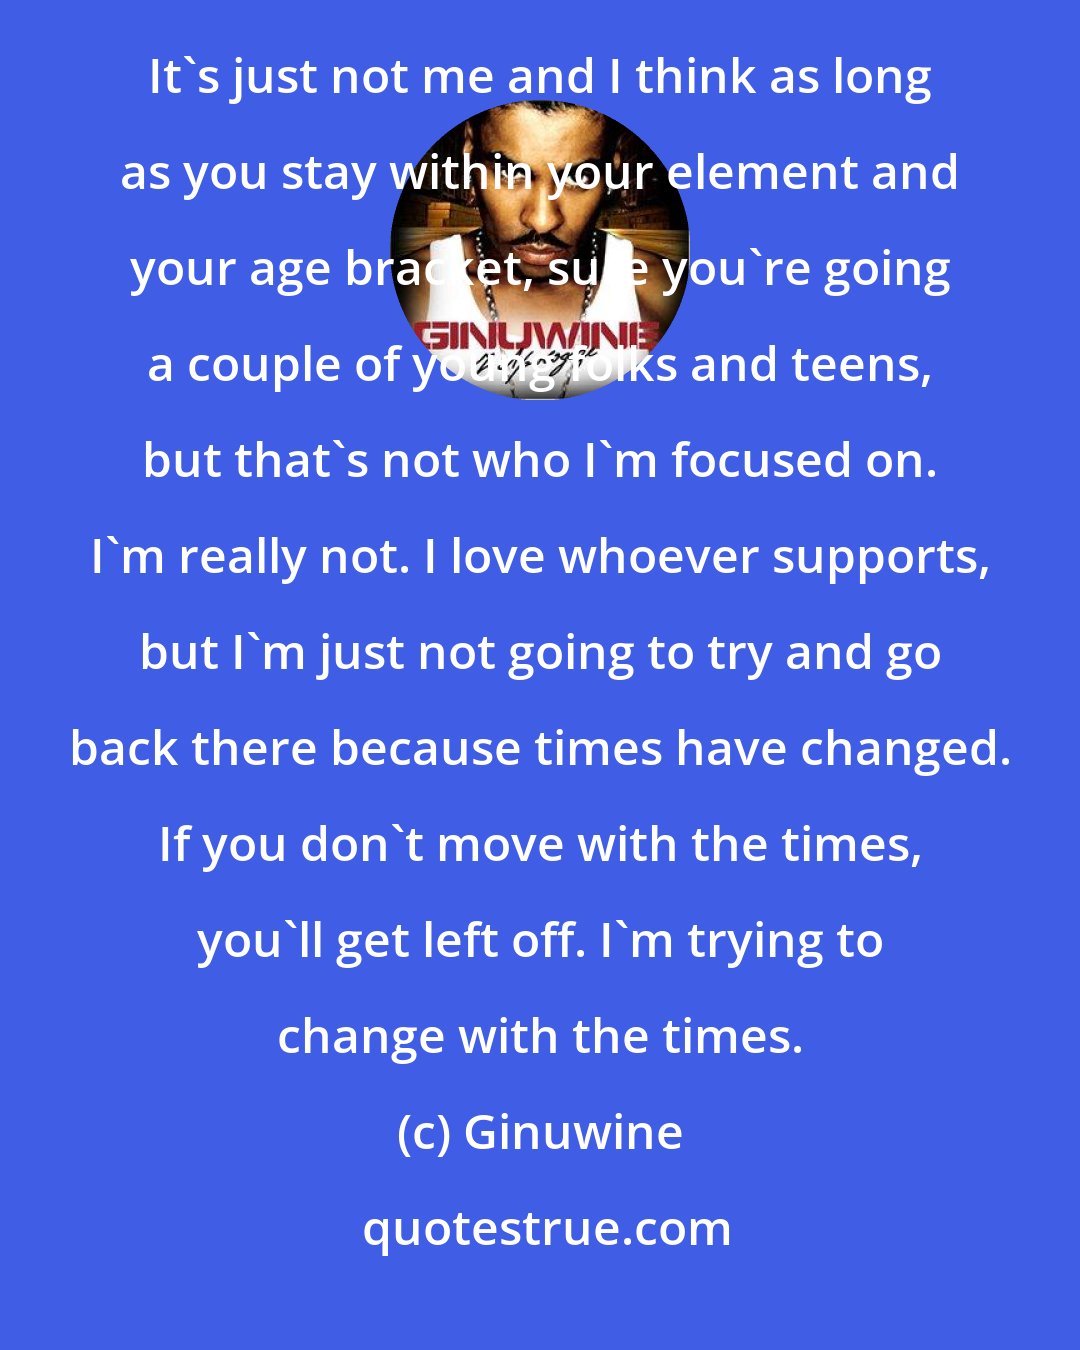 Ginuwine: I want to tell everybody that you won't hear me trying to pop bottles in the club and all that kind of stuff. It's just not me and I think as long as you stay within your element and your age bracket, sure you're going a couple of young folks and teens, but that's not who I'm focused on. I'm really not. I love whoever supports, but I'm just not going to try and go back there because times have changed. If you don't move with the times, you'll get left off. I'm trying to change with the times.